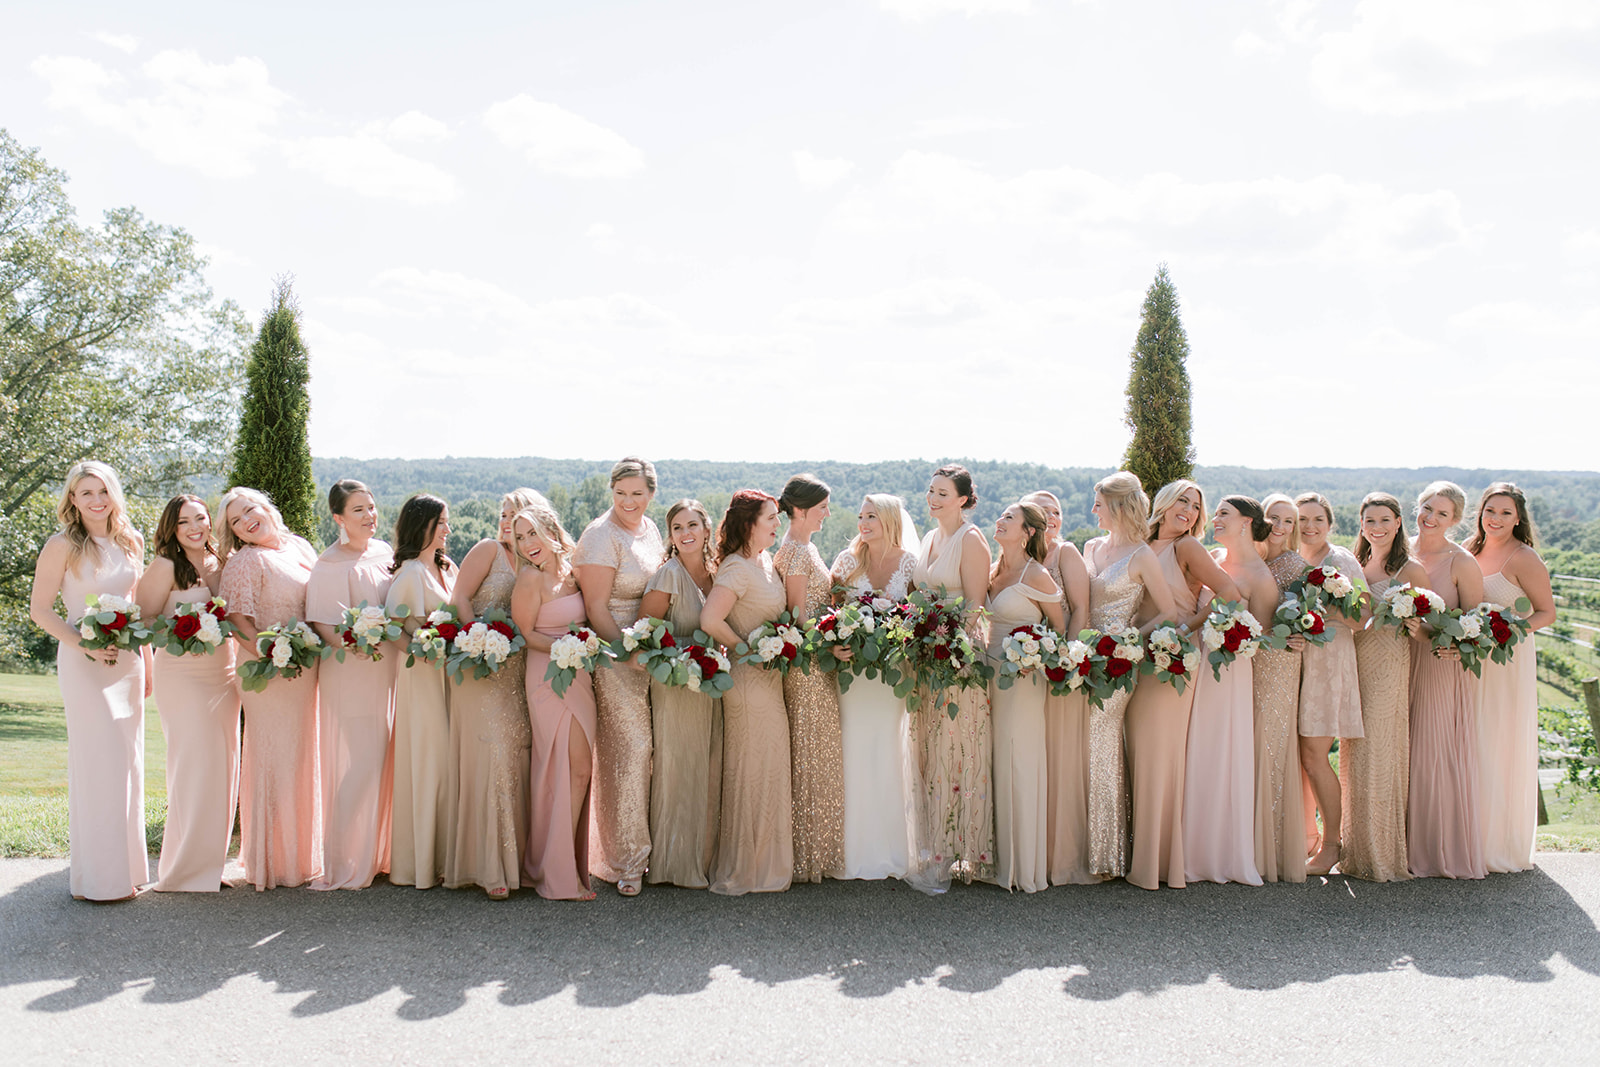 Bride with bridesmaids wearing dresses in a tonal range in blush and gold holding burgundy, blush and ivory bouquets